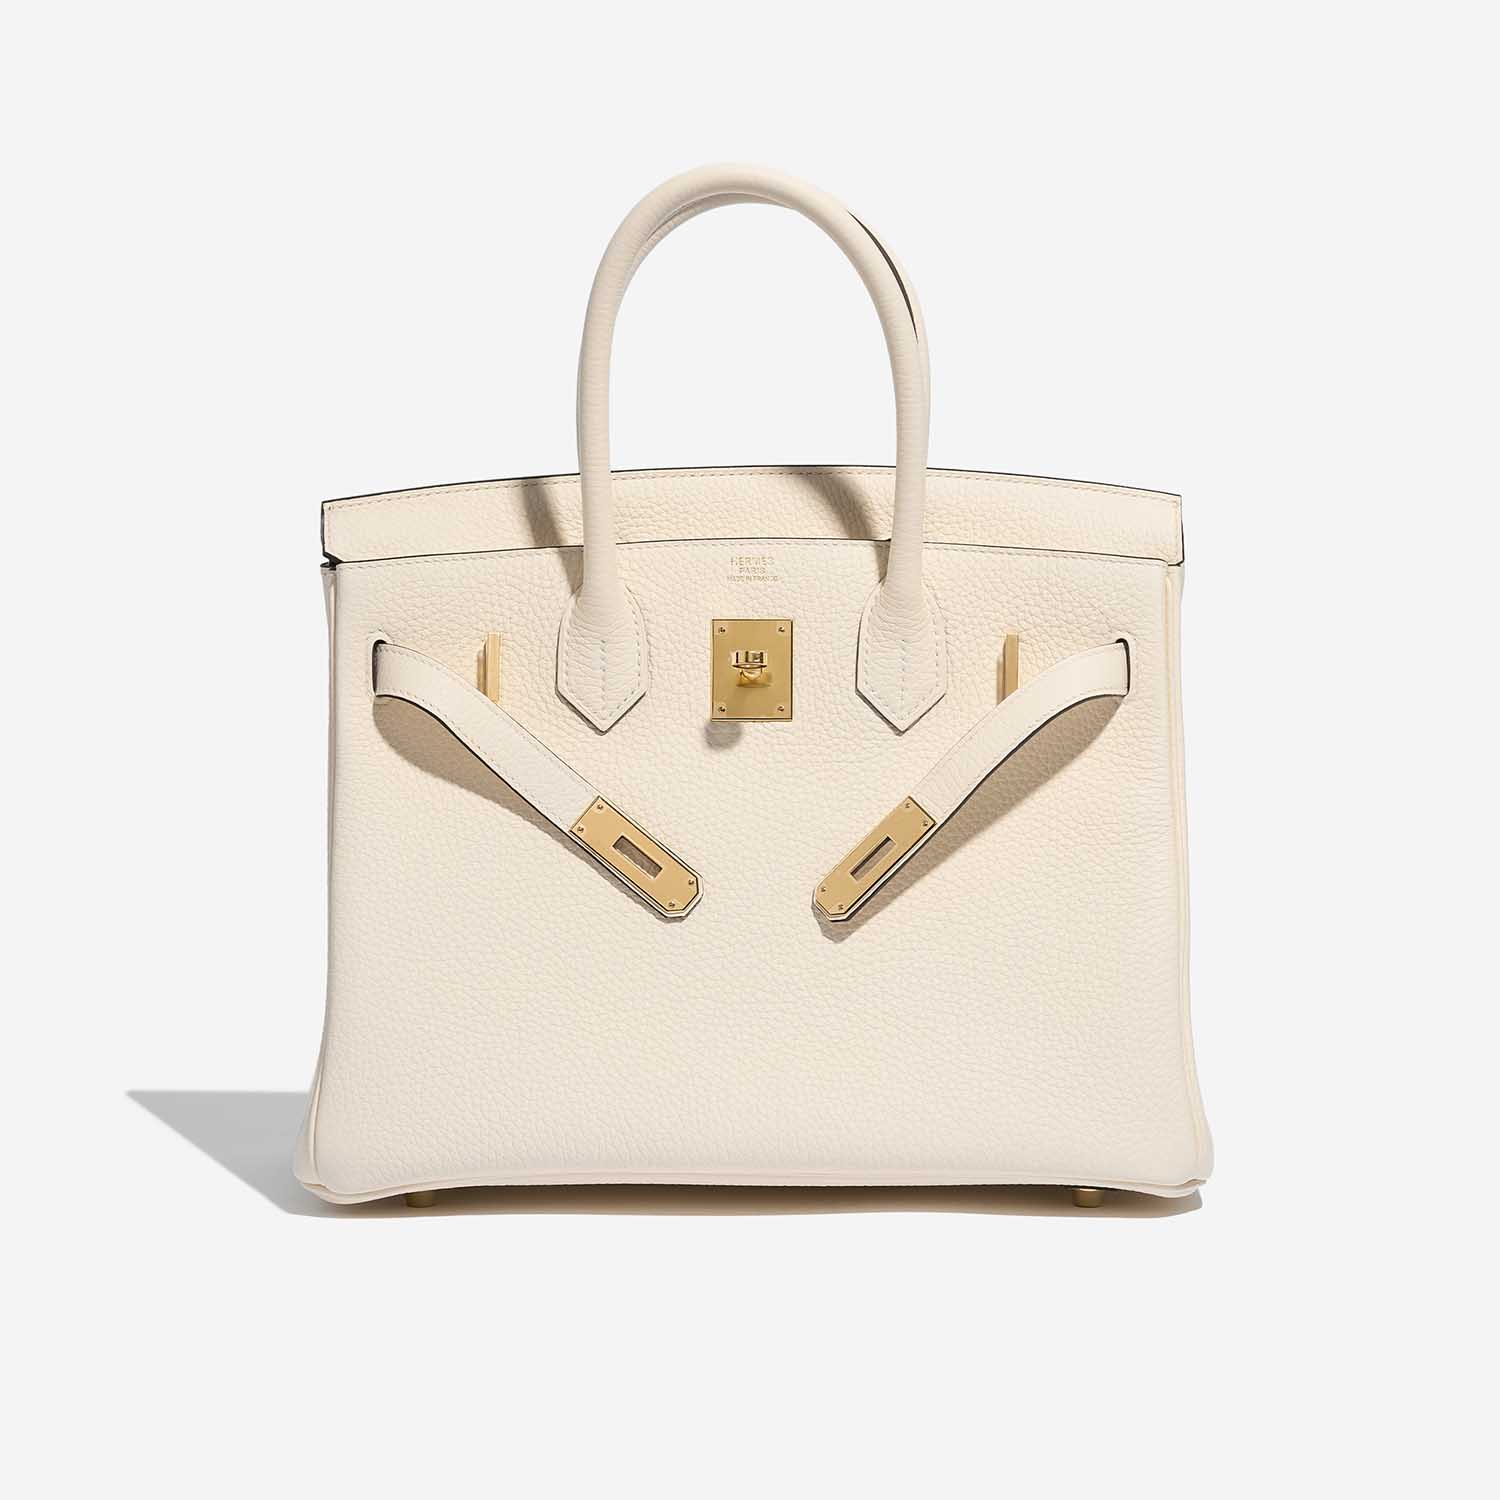 Pre-owned Hermès bag Birkin 30 Taurillon Clemence Nata White Front Open | Sell your designer bag on Saclab.com